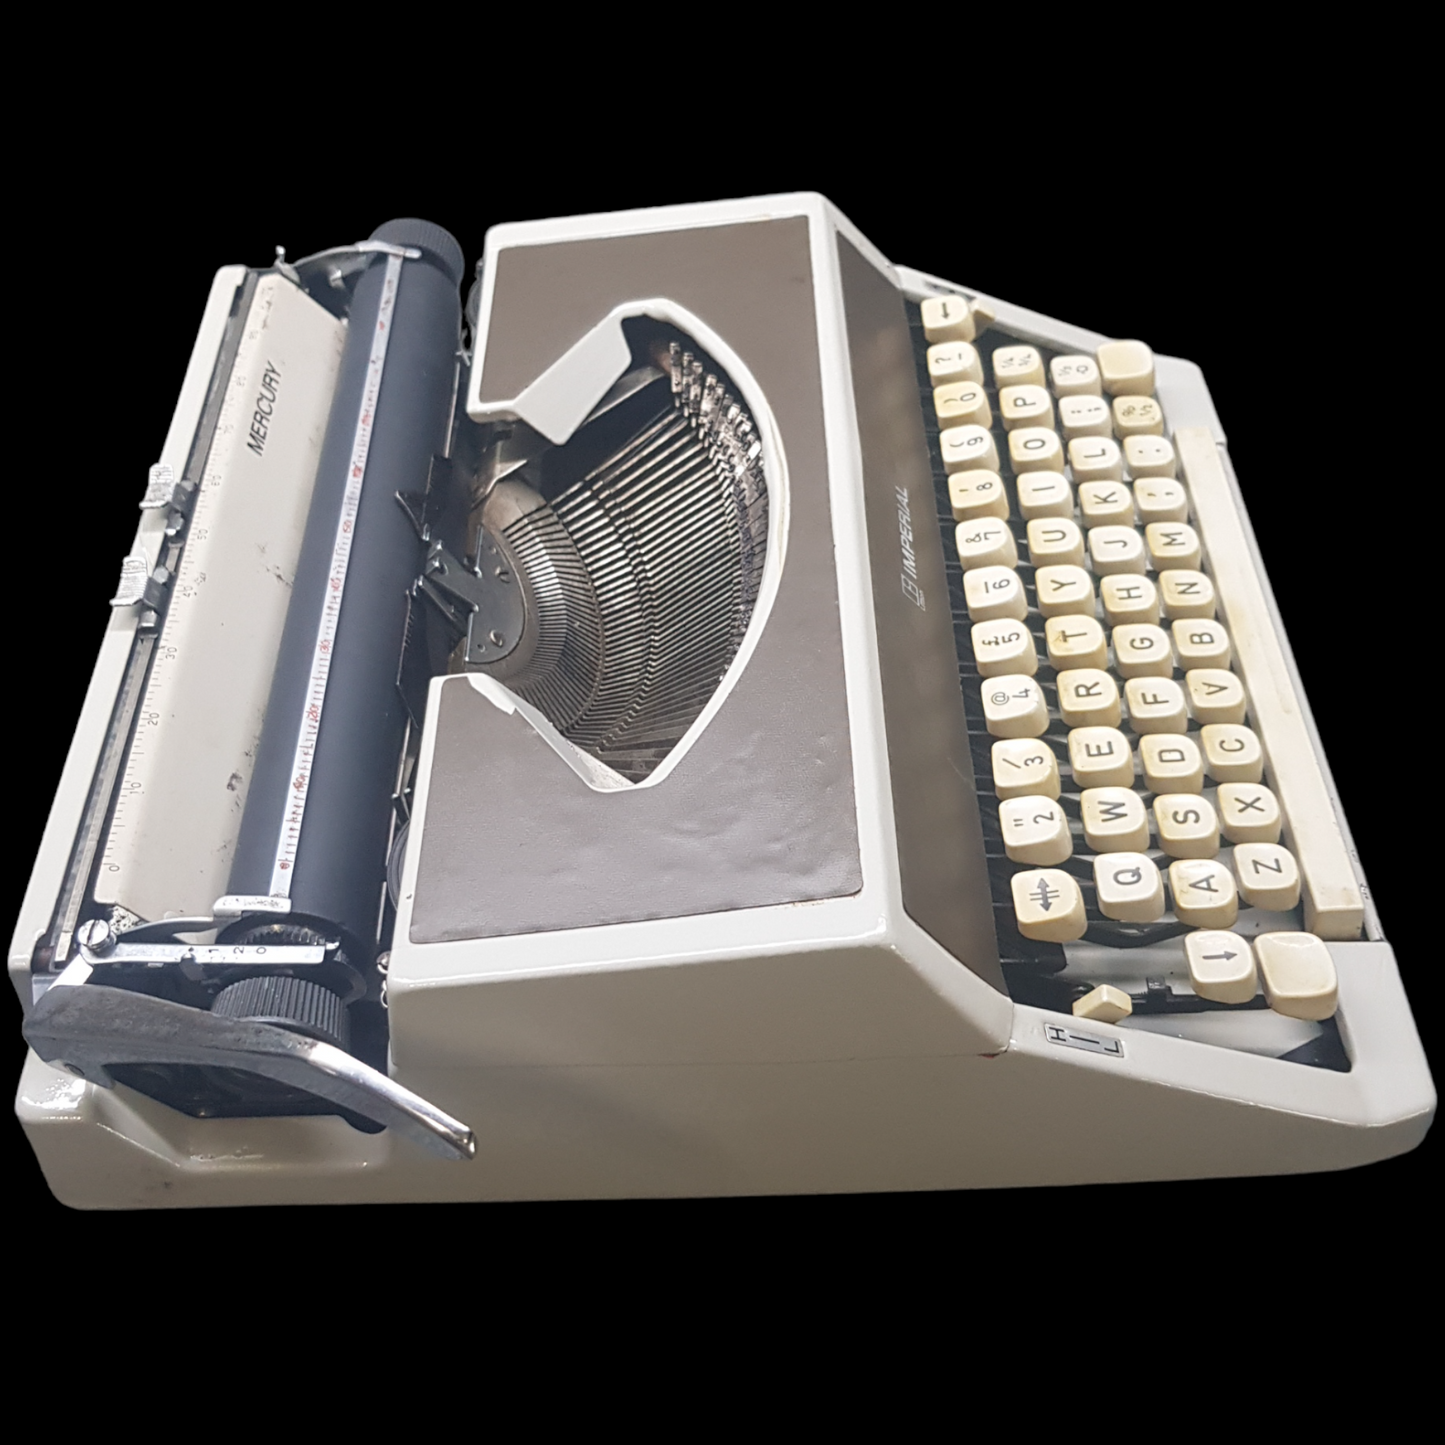 Image of Imperial Typewriter. Portable Typewriter. Made in Japan. Available from universaltypewritercompany.in